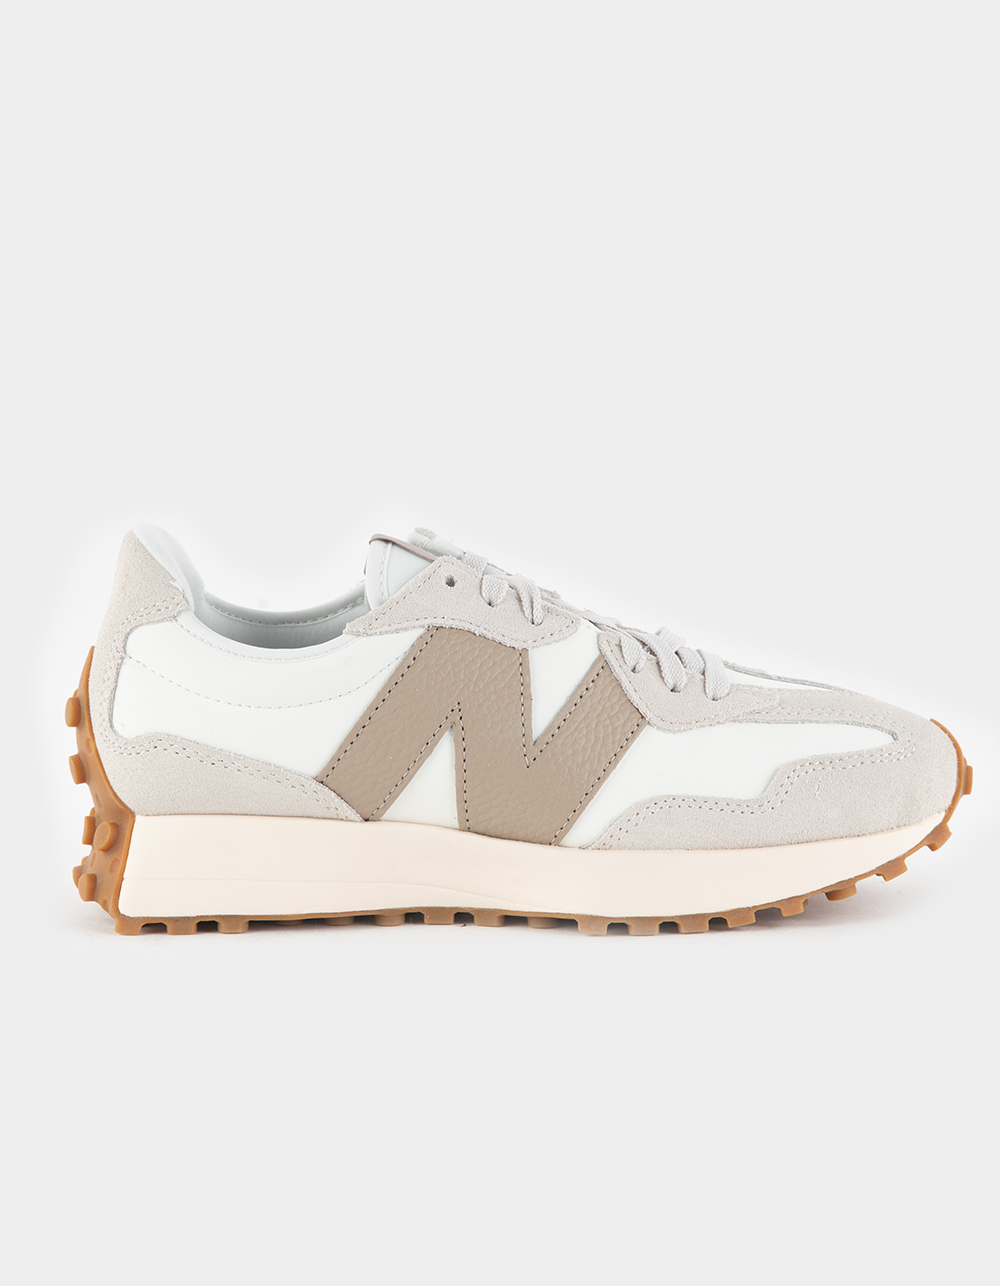 NEW BALANCE 327 Womens Shoes - WHITE COMBO | Tillys